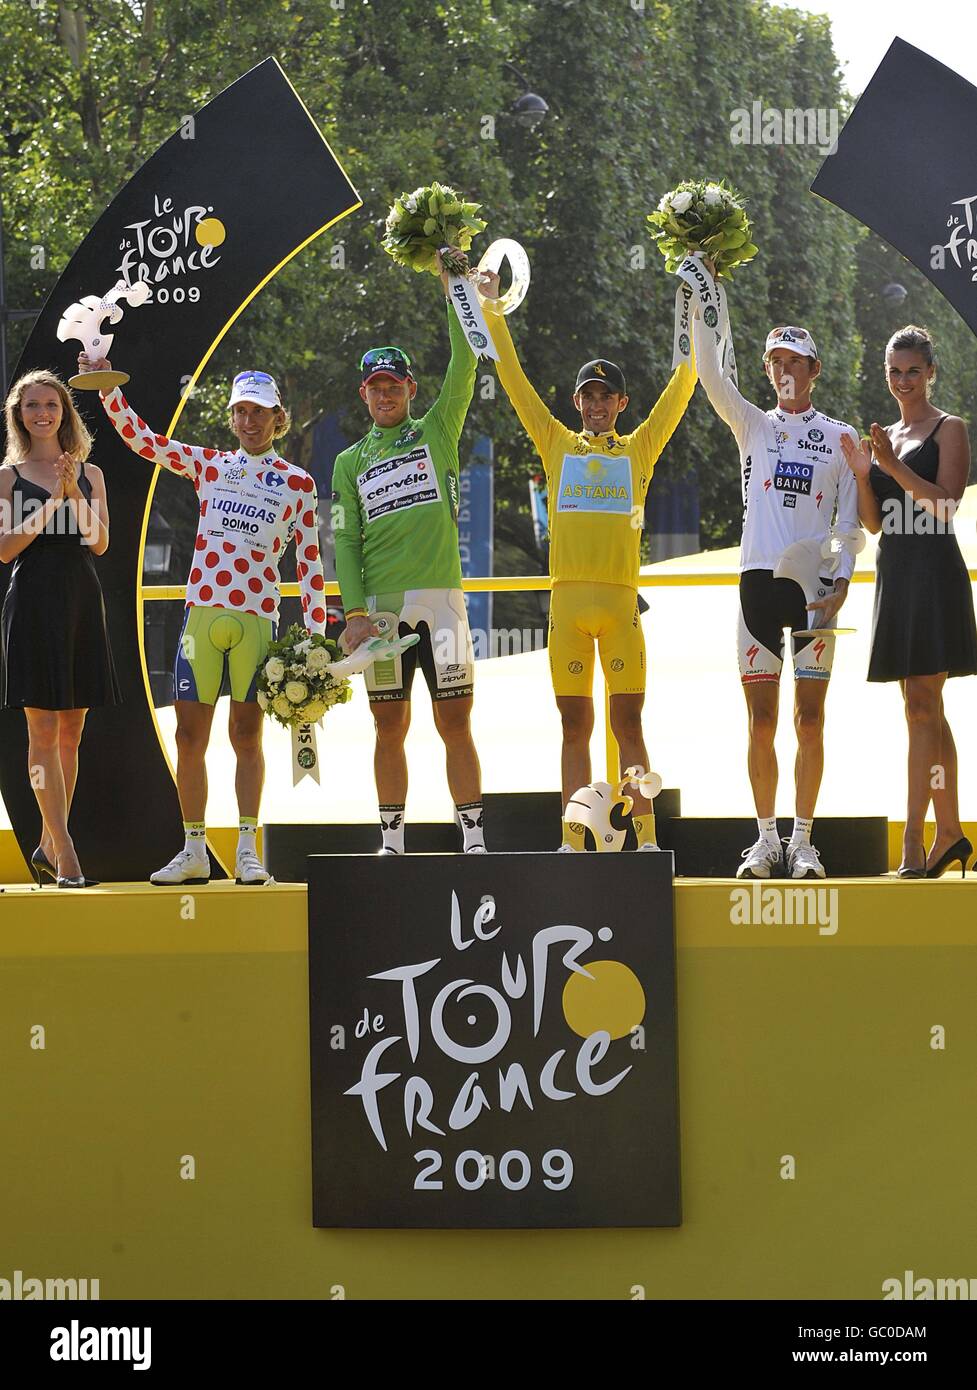 (left to right) Franco Pellizotti, wearing the best climber's dotted jersey, Thor Hushovd, wearing the best sprinter's green jersey, Tour de France winner Alberto Contador, wearing the overall leader's yellow jersey, and Andy Schleck, wearing the best young rider's white jersey, on the podium the twenty first and final stage of the Tour de France between Montereau-Fault-Yonne and the Champs-Elysees in Paris. Stock Photo